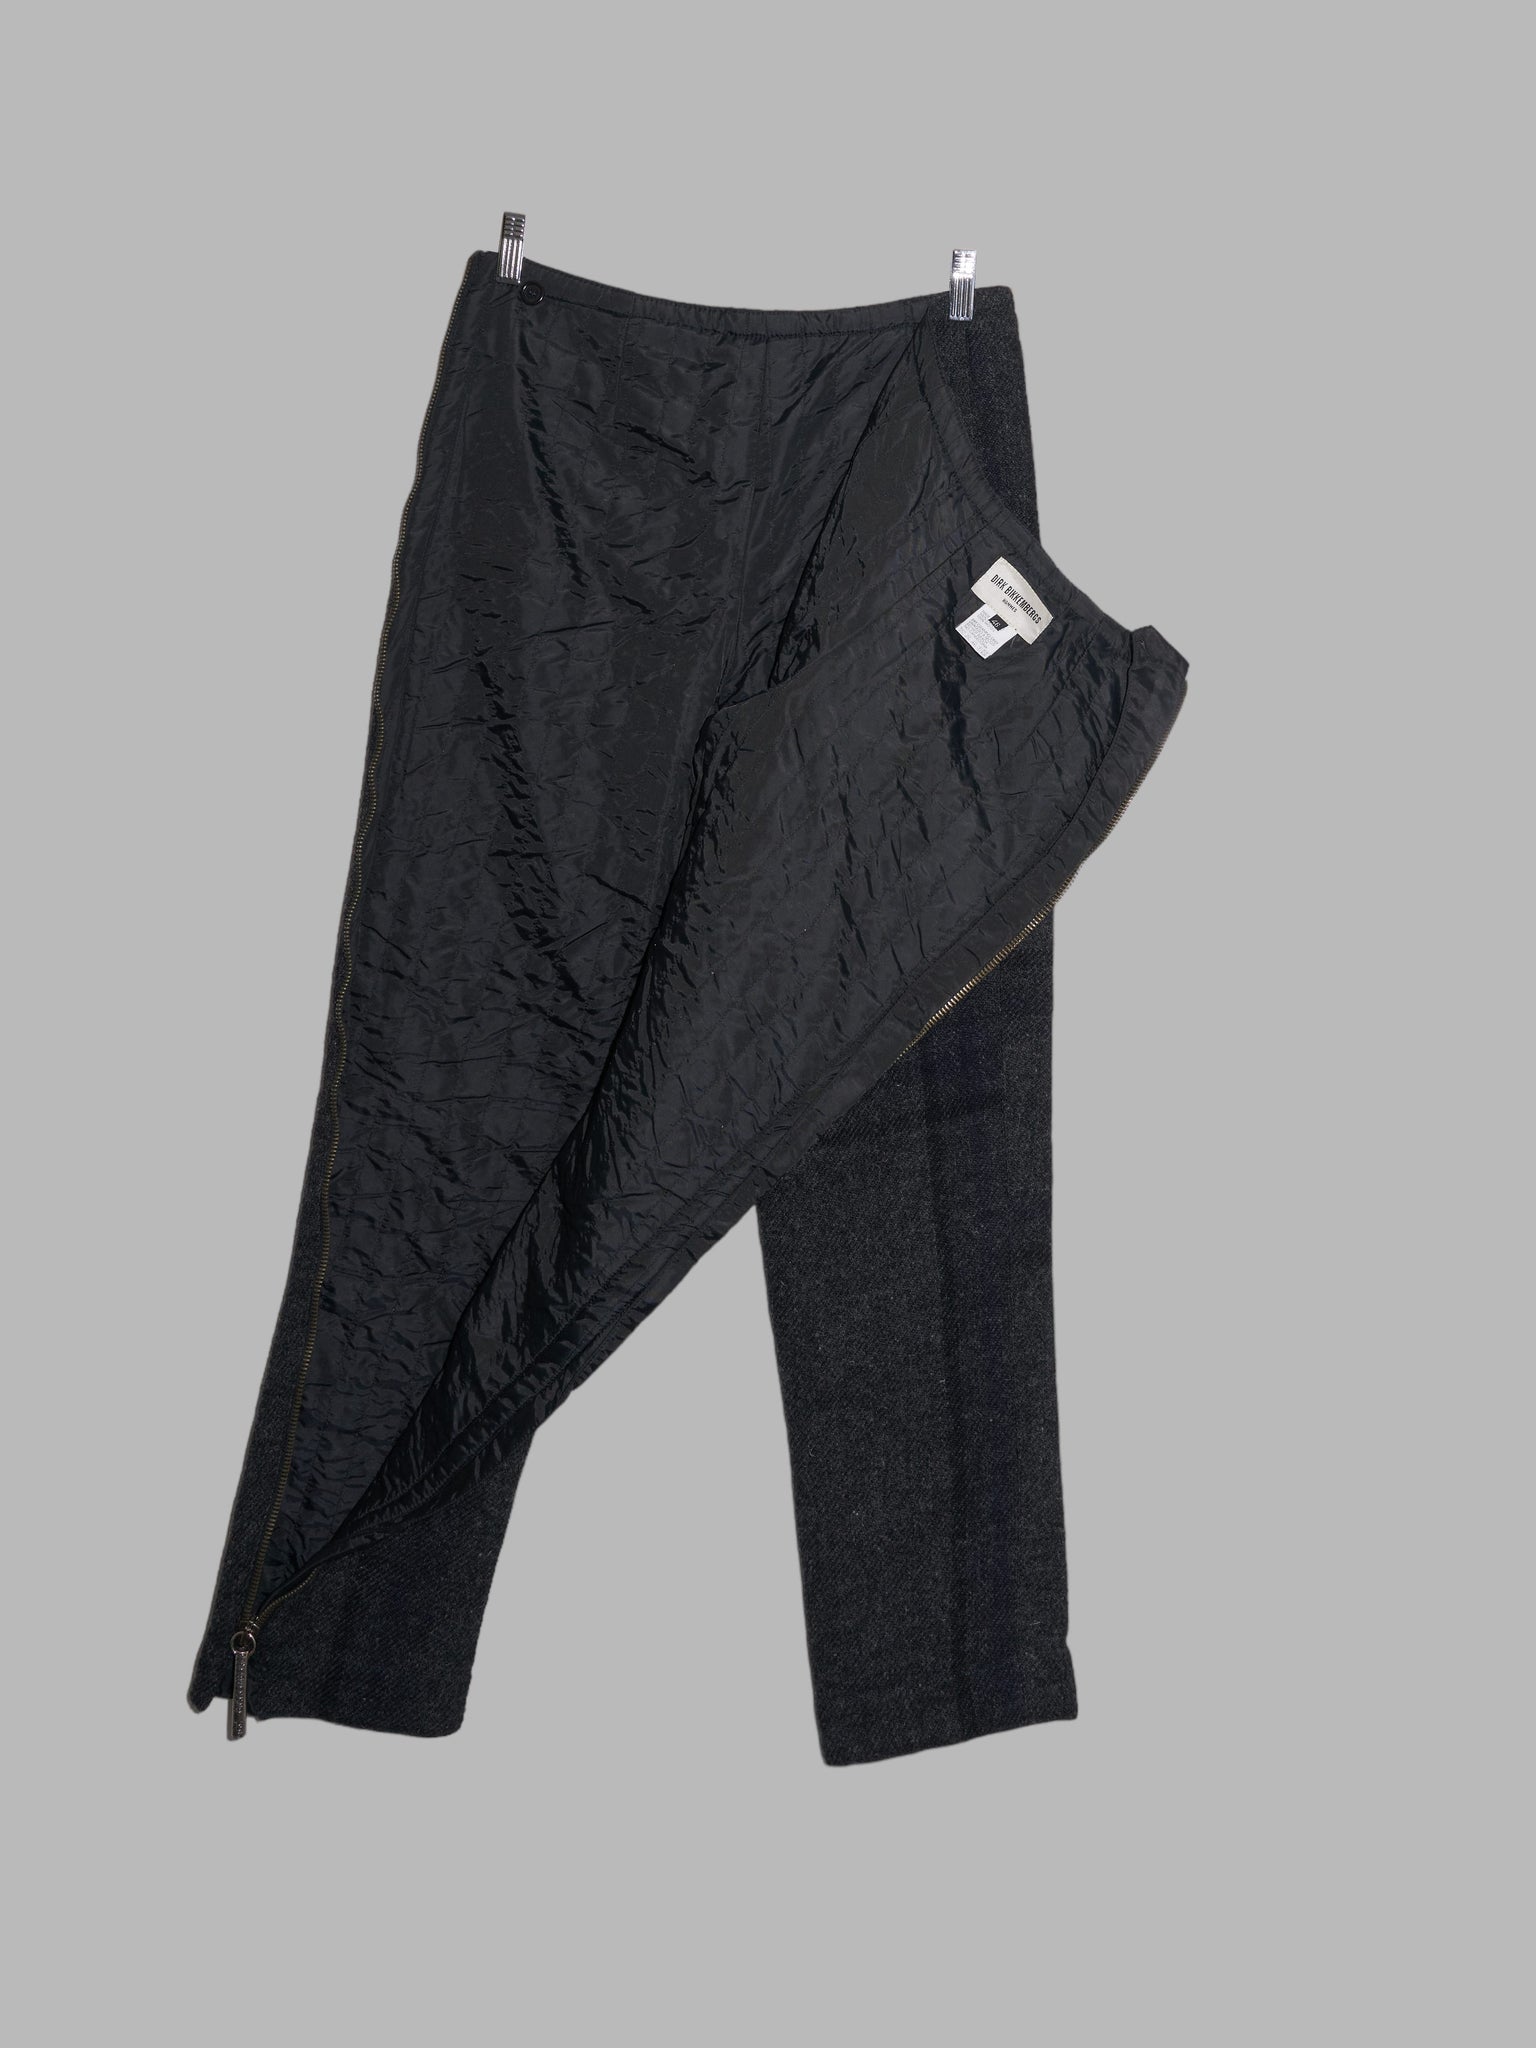 Dirk Bikkembergs Hommes 1990s charcoal wool plaid quilted side zip trousers - 46